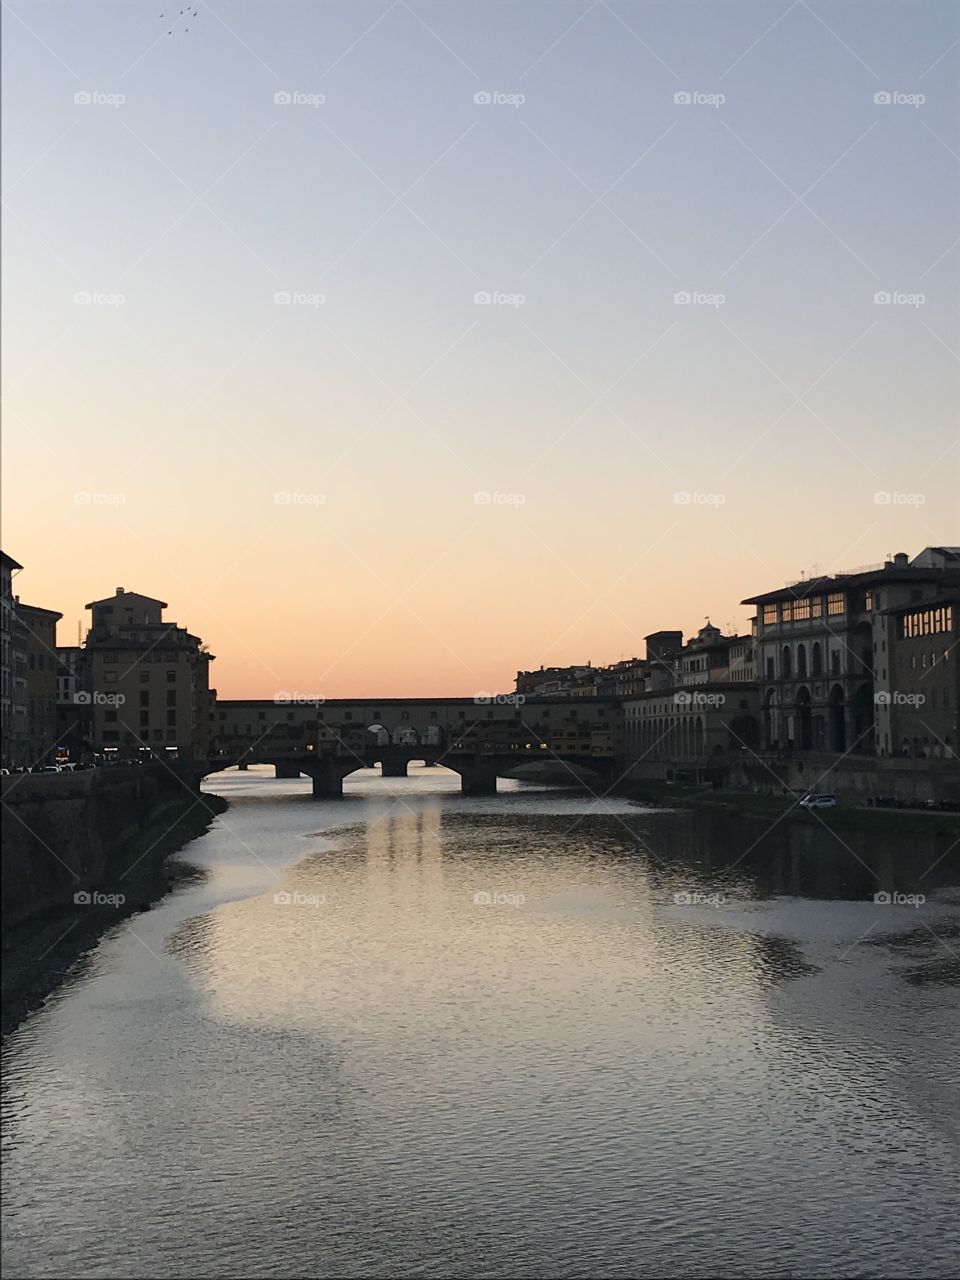 Ponte Vecchio in the rainbow coloured sunset in Florence, Italy.